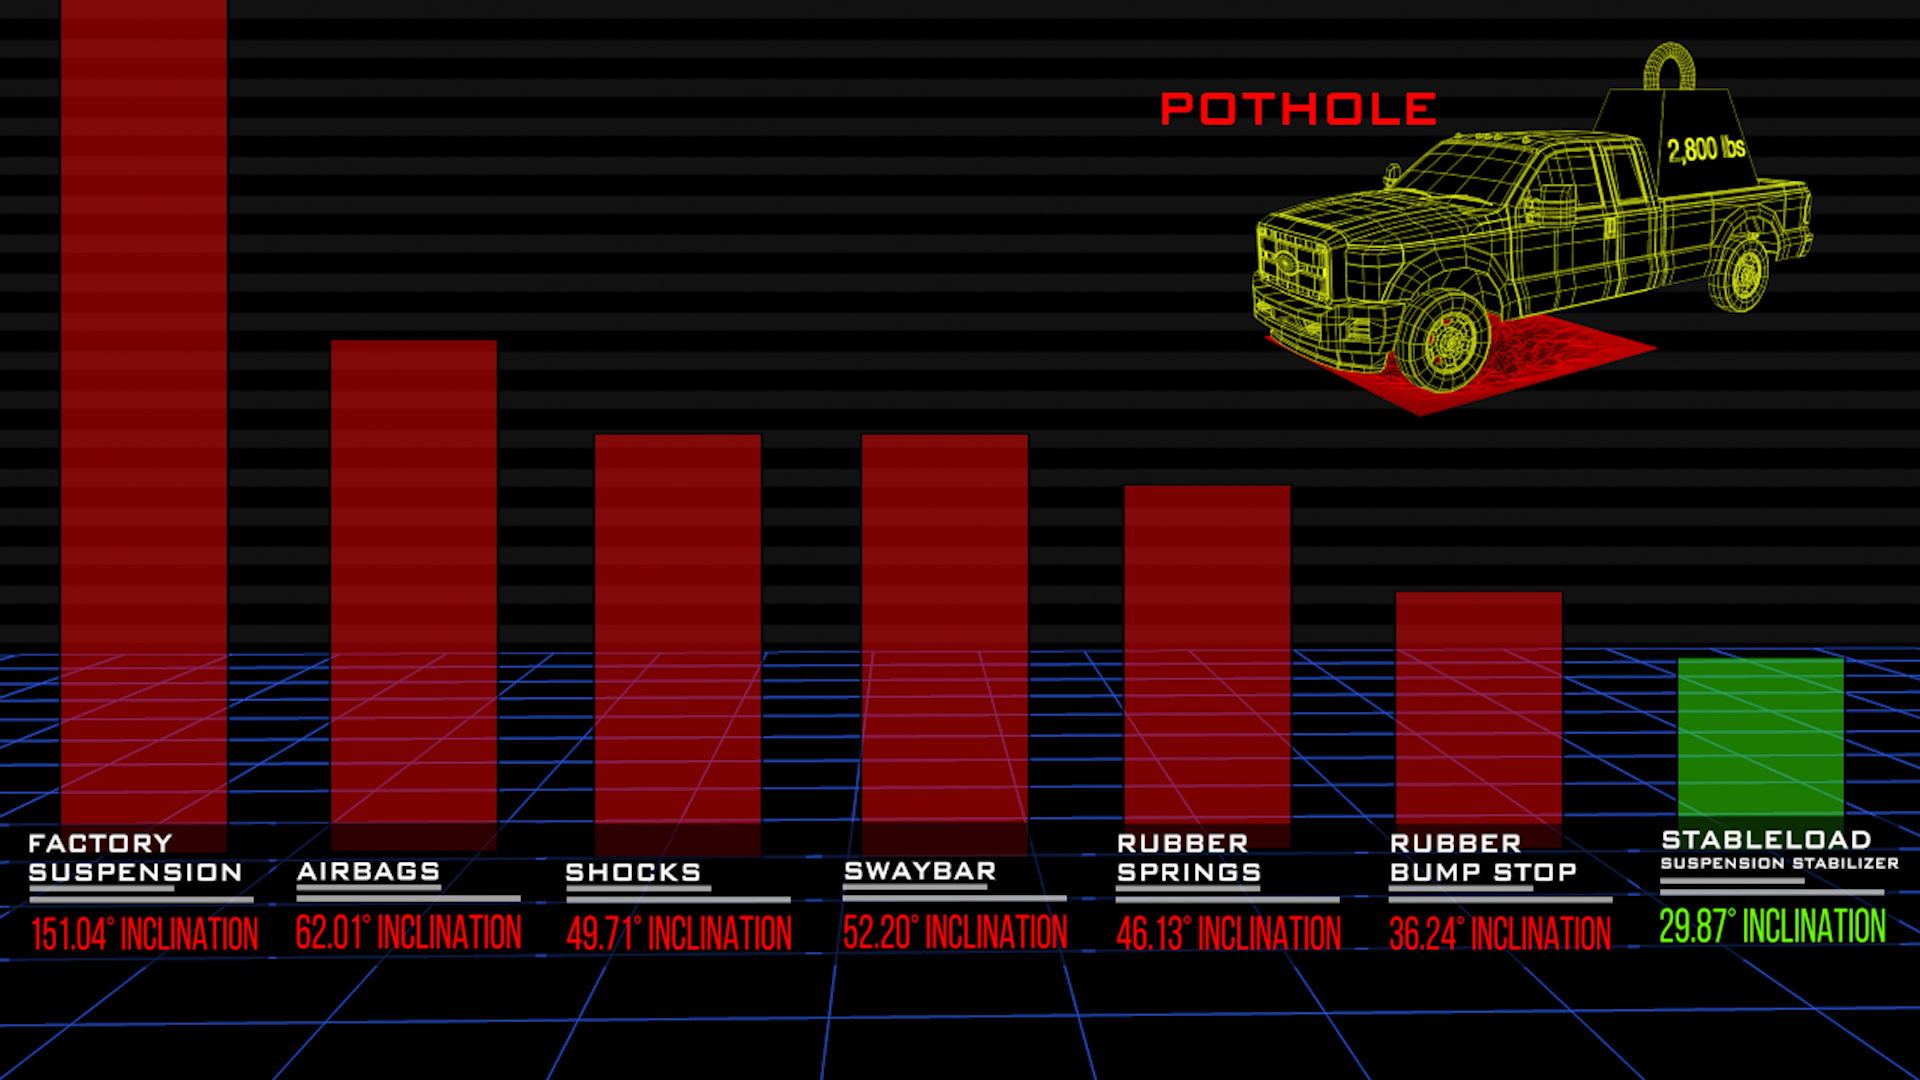  The Result from the Pothole Test 